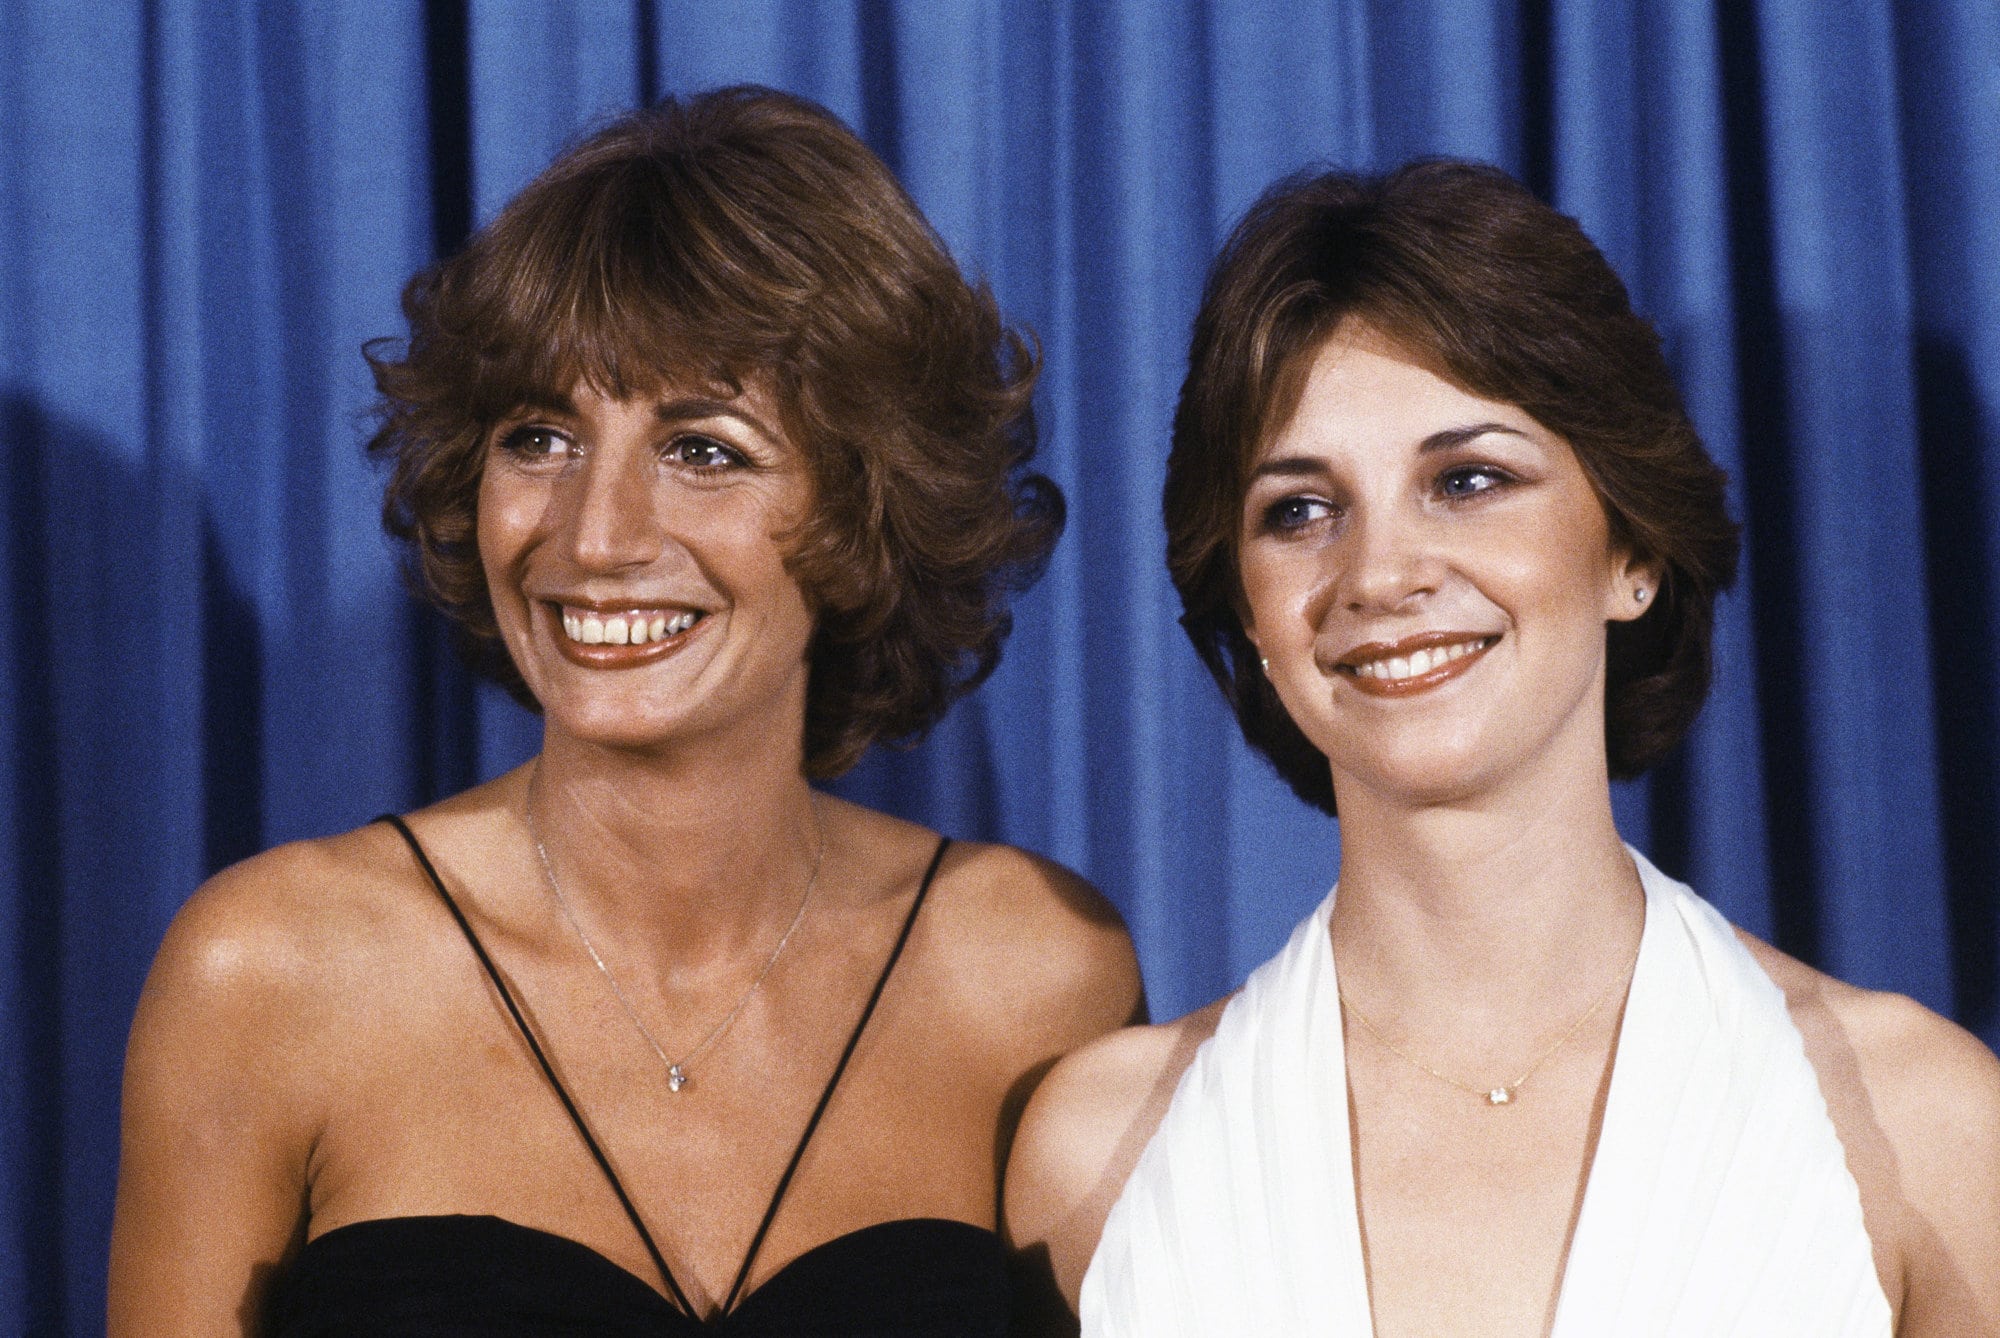 TV actresses Penny Marshall and Cindy Williams smile at the Emmy Awards in Los Angeles, Sept. 9, 1979.  The duo play television's "Laverne and Shirley."  (AP Photo/George Brich)